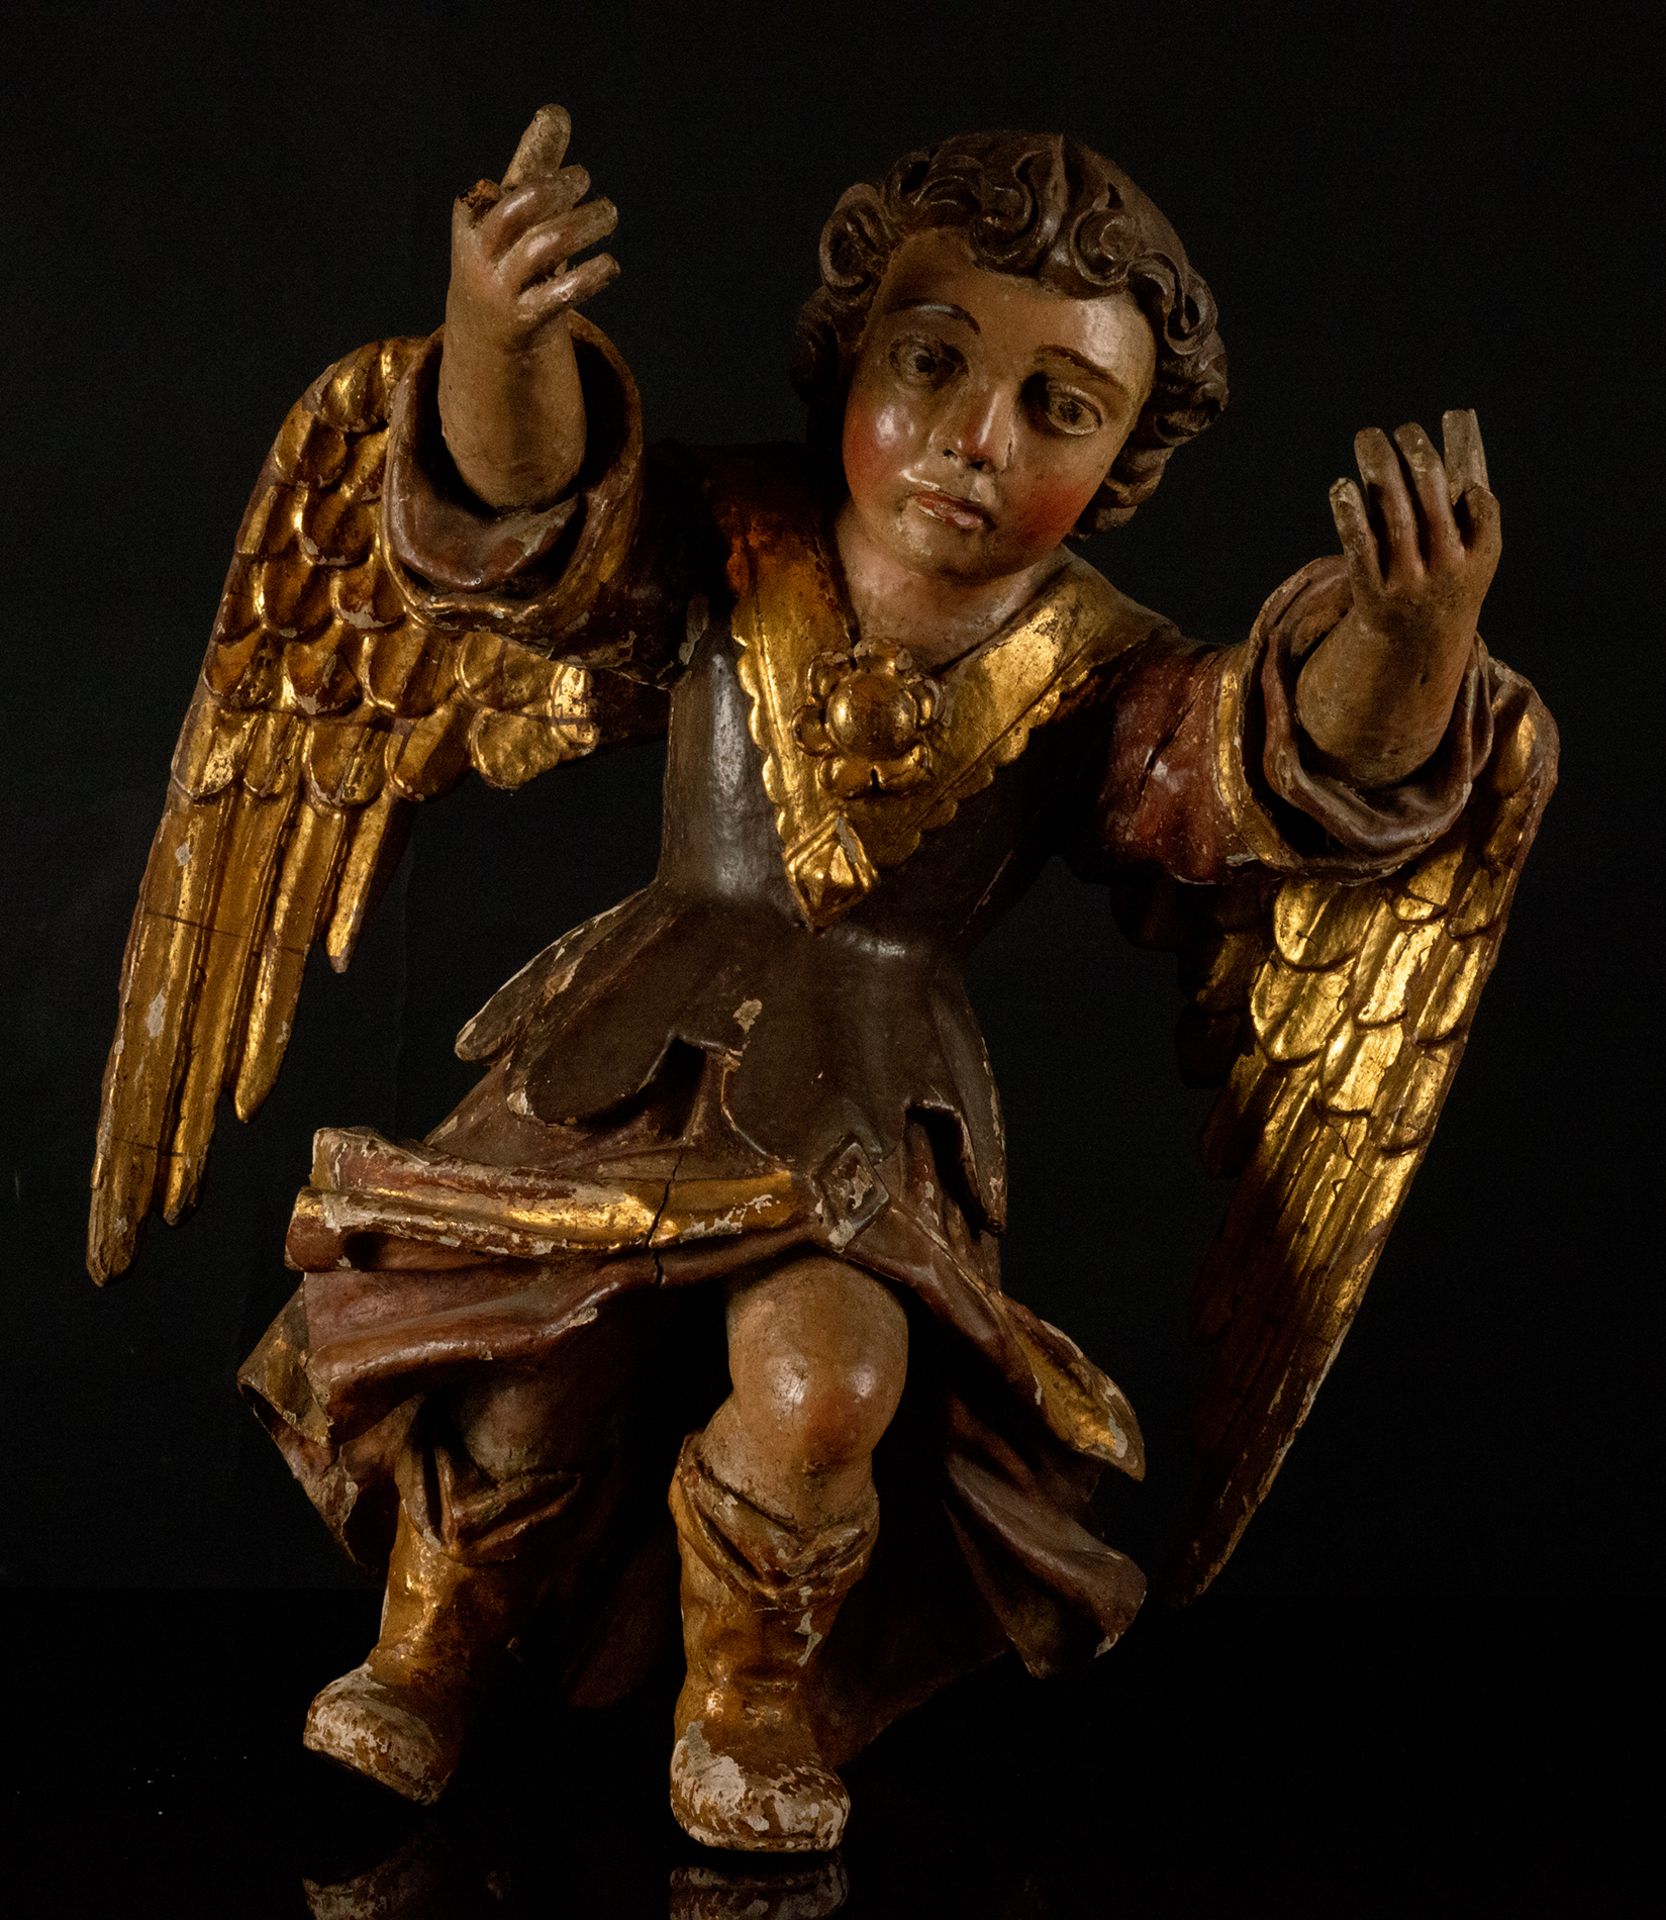 Angel in Carved and polychrome Wood, Portuguese colonial work, Goa, 17th century